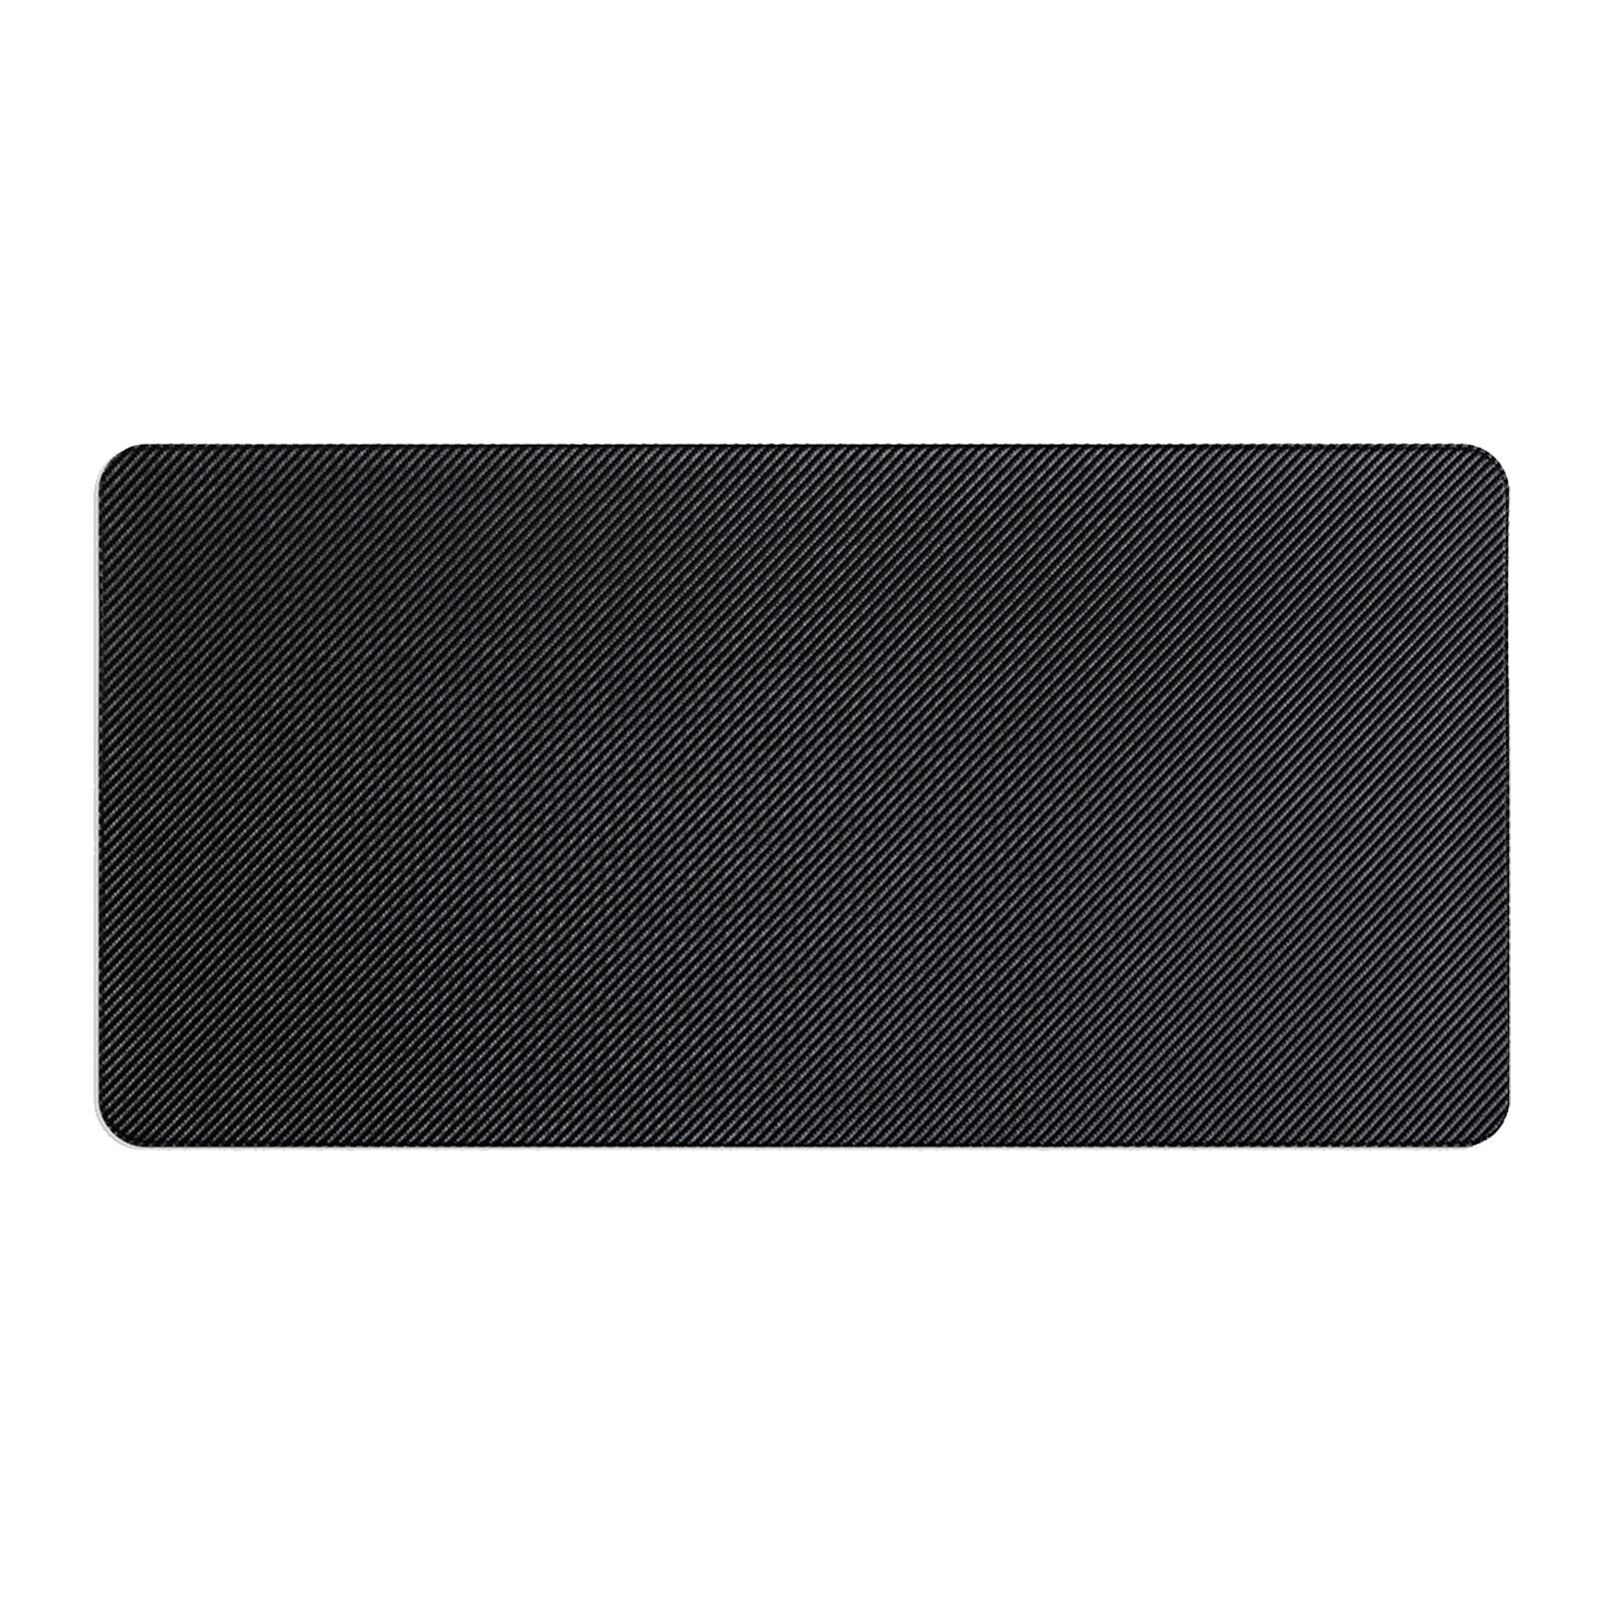 Desk Pad Computer Mat For Desk Leather Mouse Pad Comfortable Feeling 